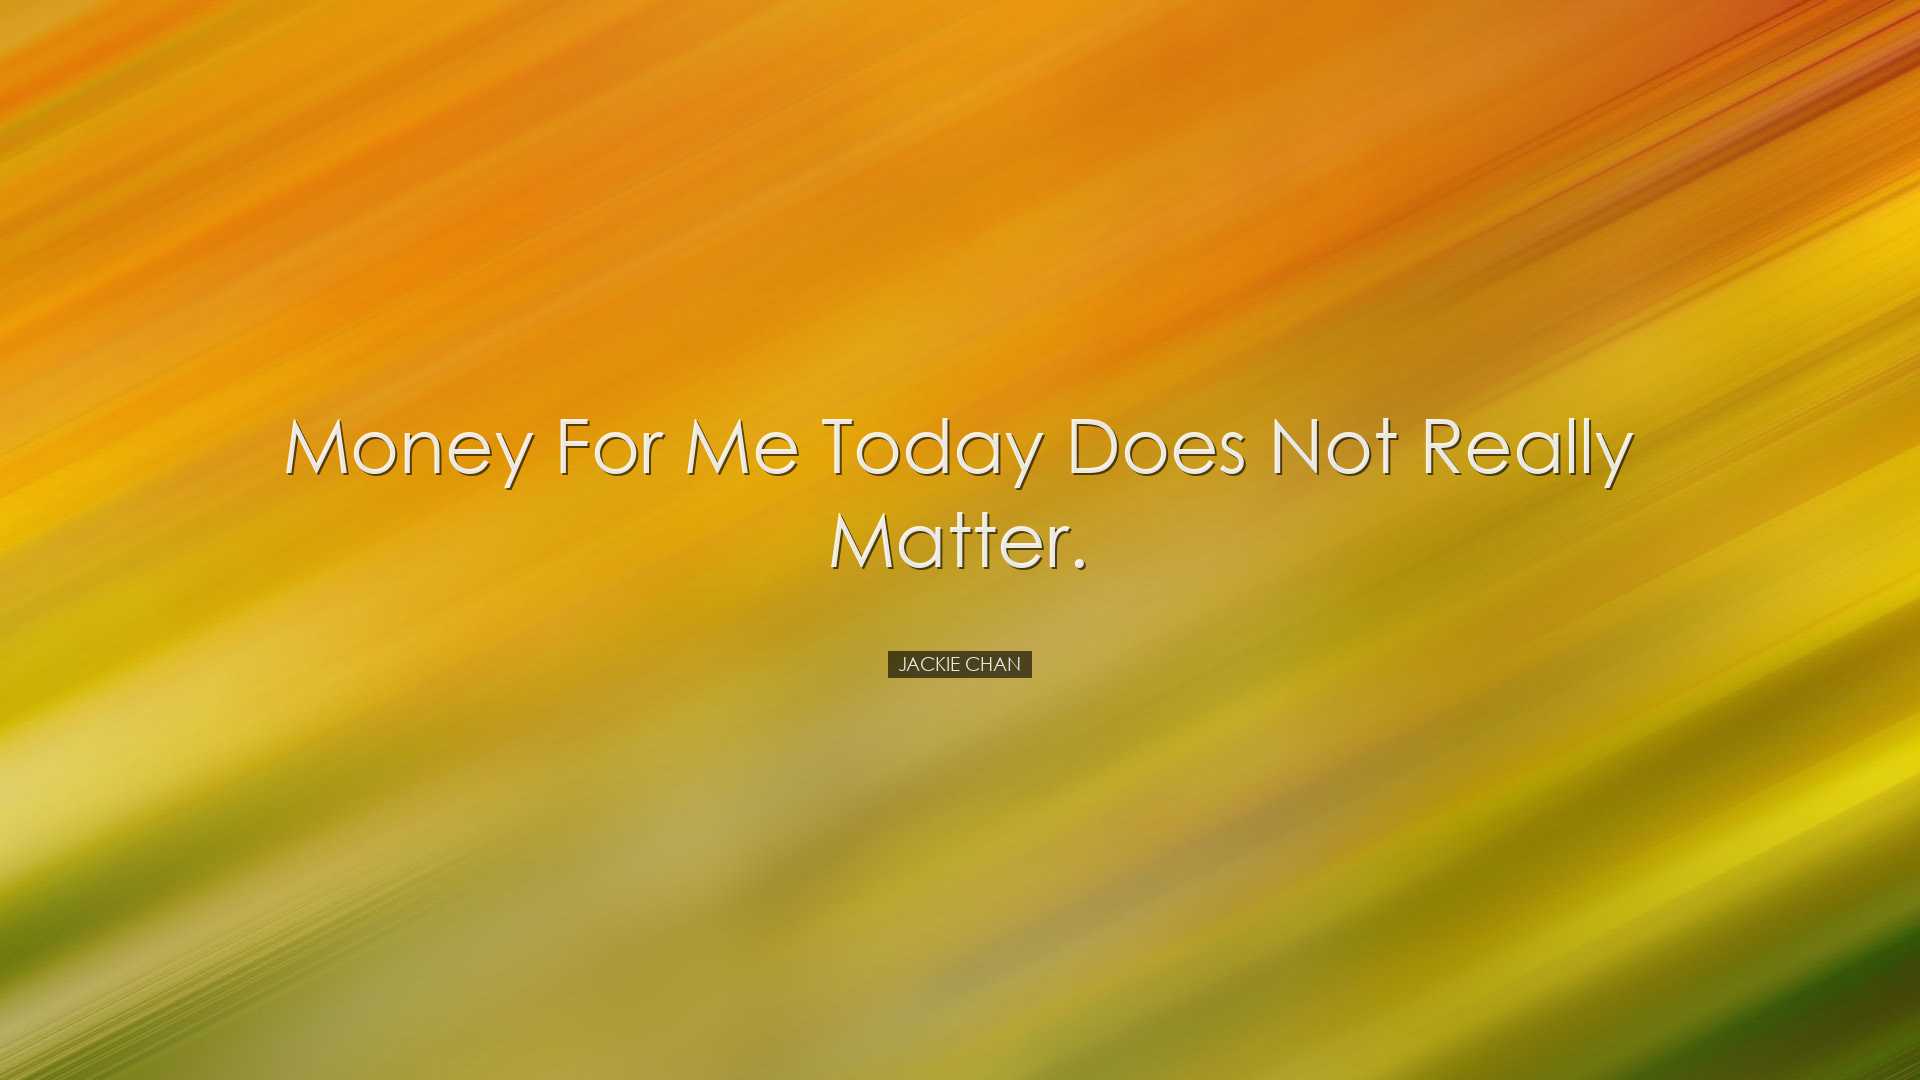 Money for me today does not really matter. - Jackie Chan